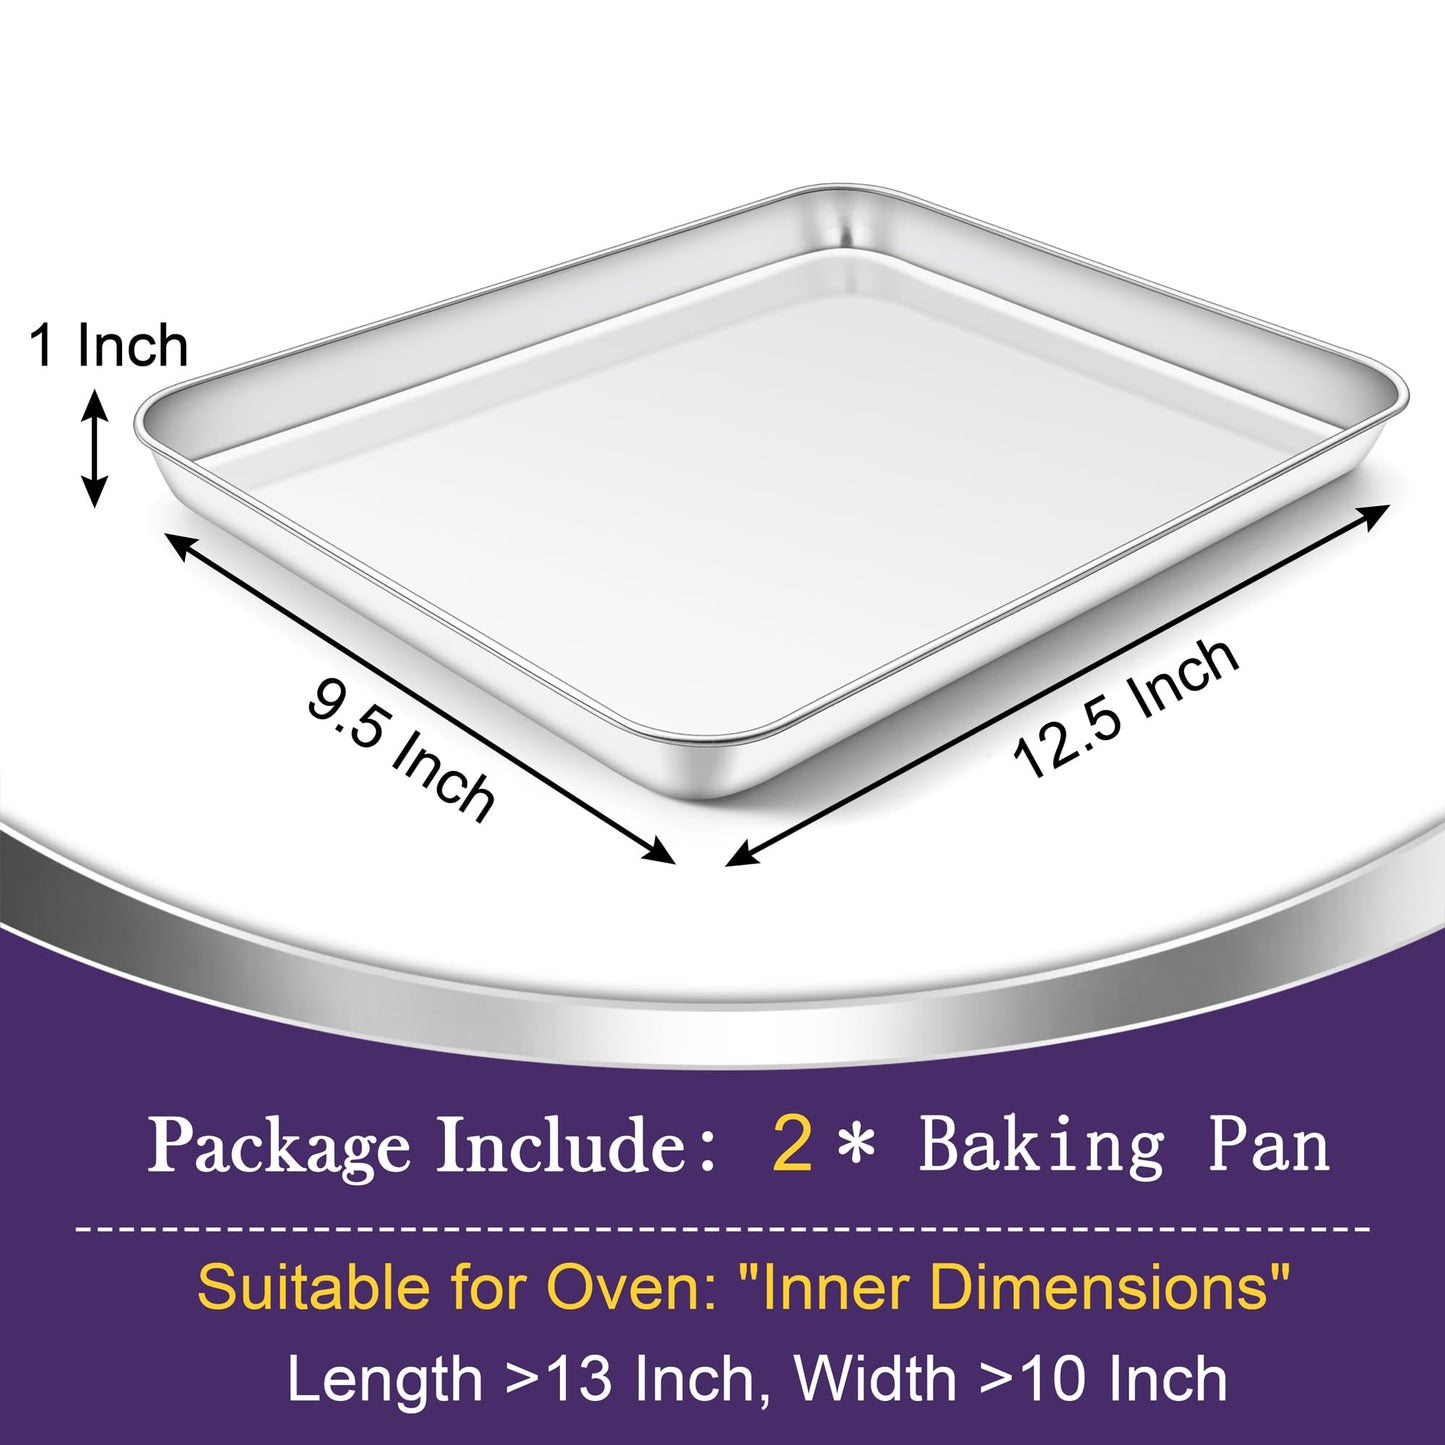 TeamFar Toaster Oven Pan Set of 2, Stainless Steel Toaster Oven Baking Tray Ovenware, 12.5’’x 9.5’’x1’’, Non Toxic & Healthy, Rust Free & Mirror Finish, Easy Clean & Dishwasher Safe